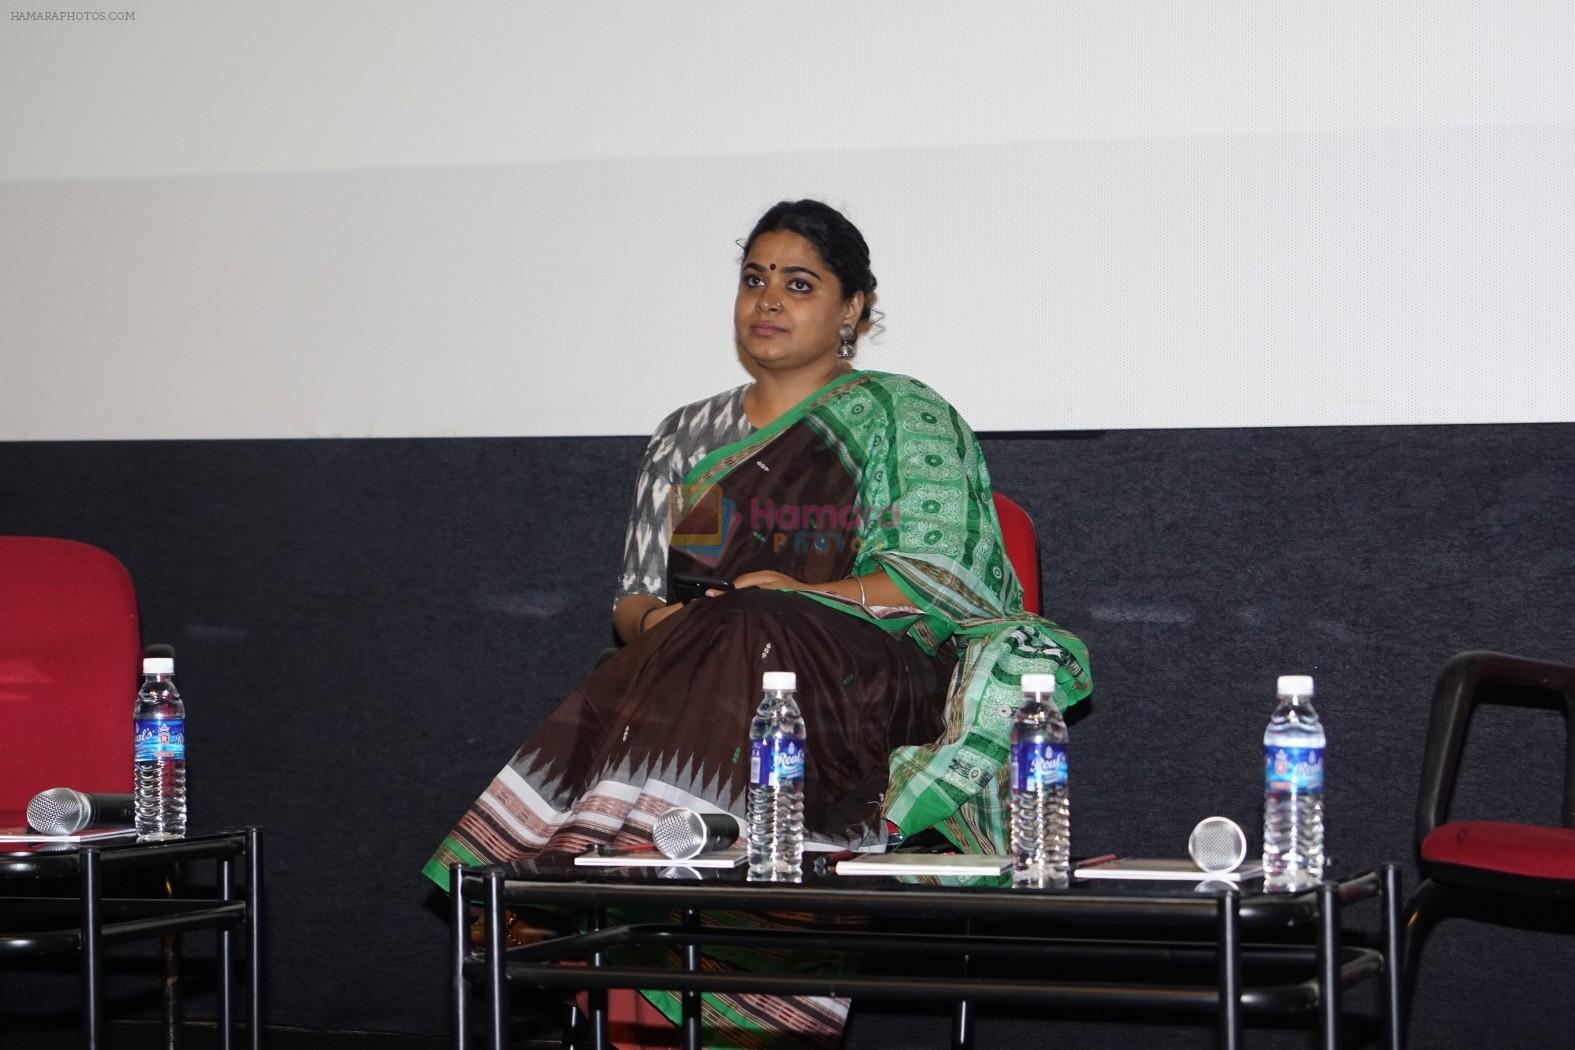 Ashwiny Iyer Tiwari at Young Filmmakers of India - Panel Discussion on 23rd Nov 2017